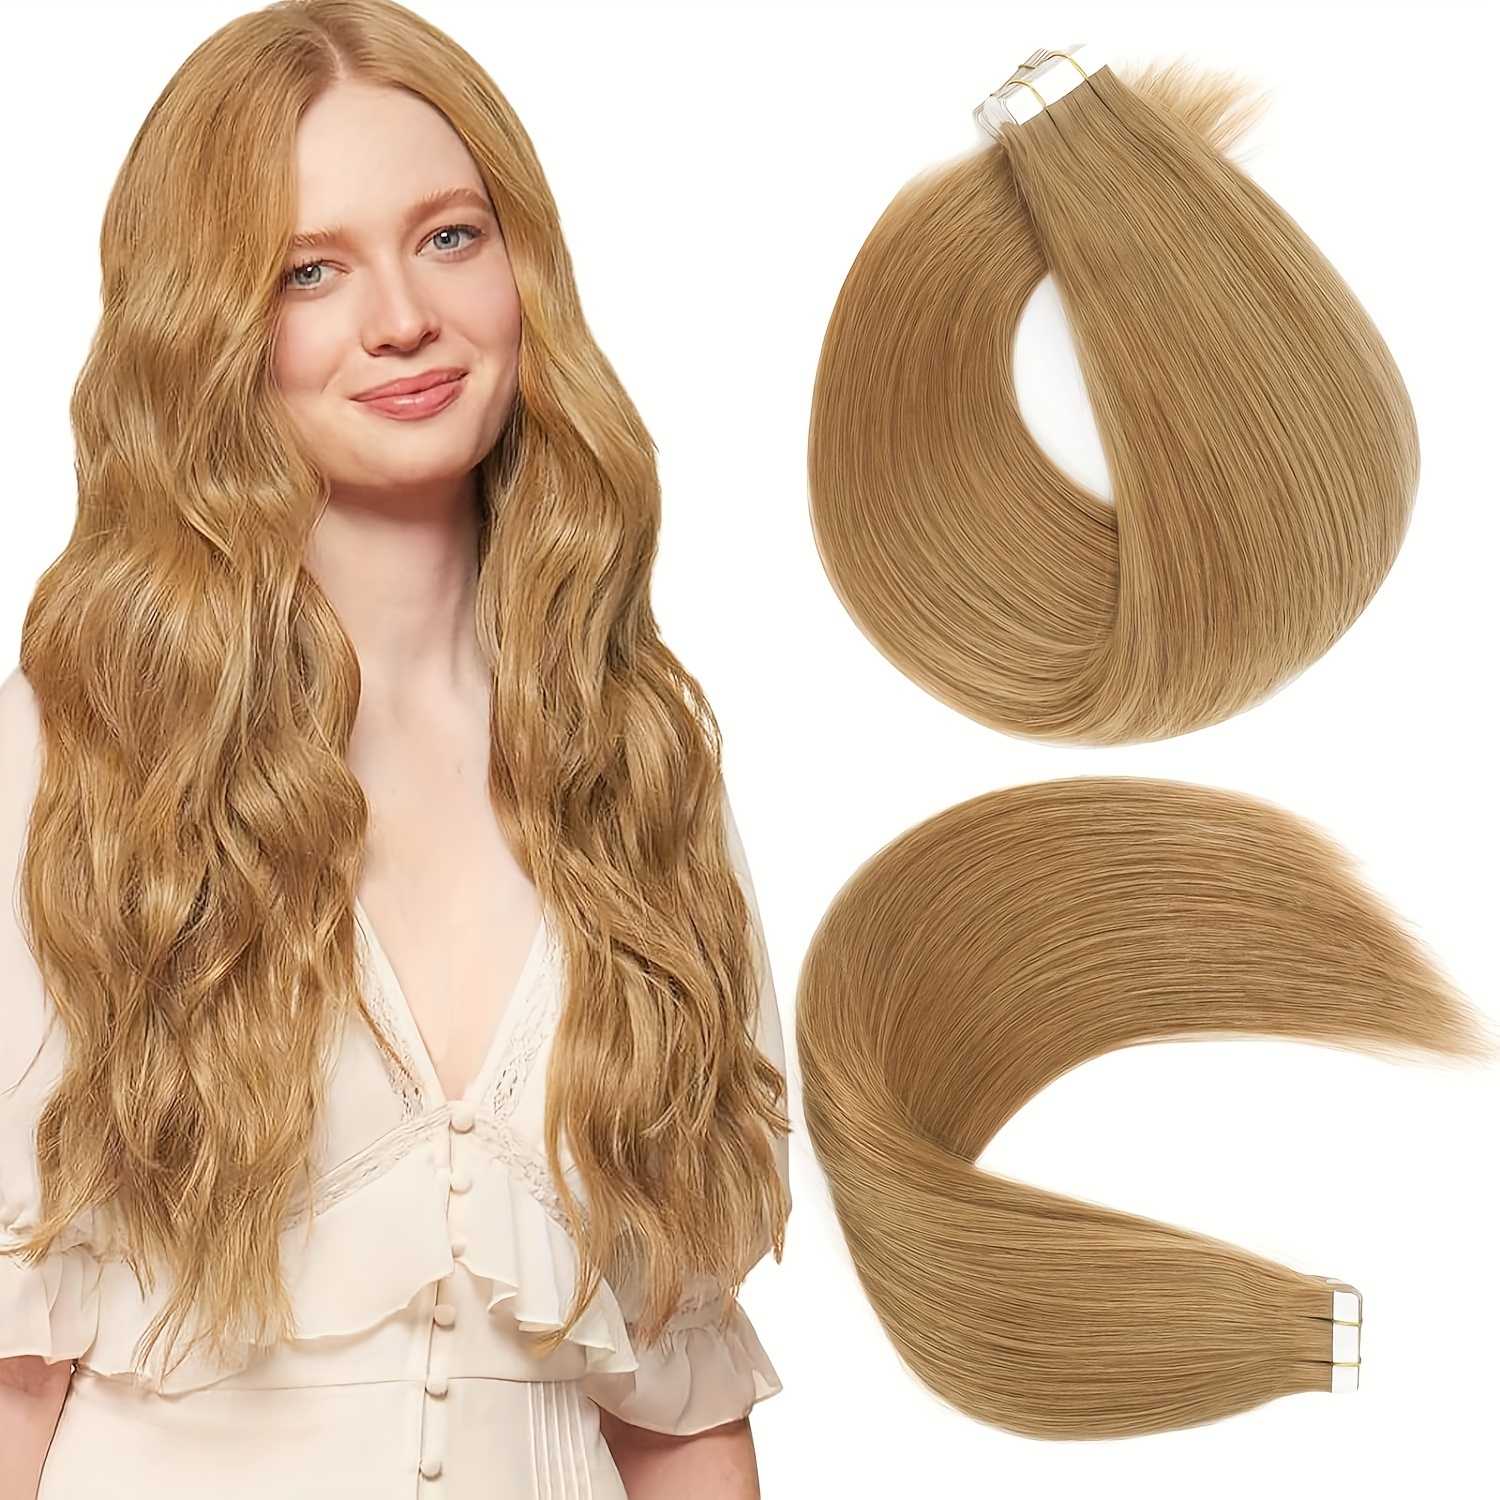 

Blonde Tape In Hair Extensions Seamless Natural Straight Human Hair Tape In Extensions #27 20pcs 30g 18-26 Inch